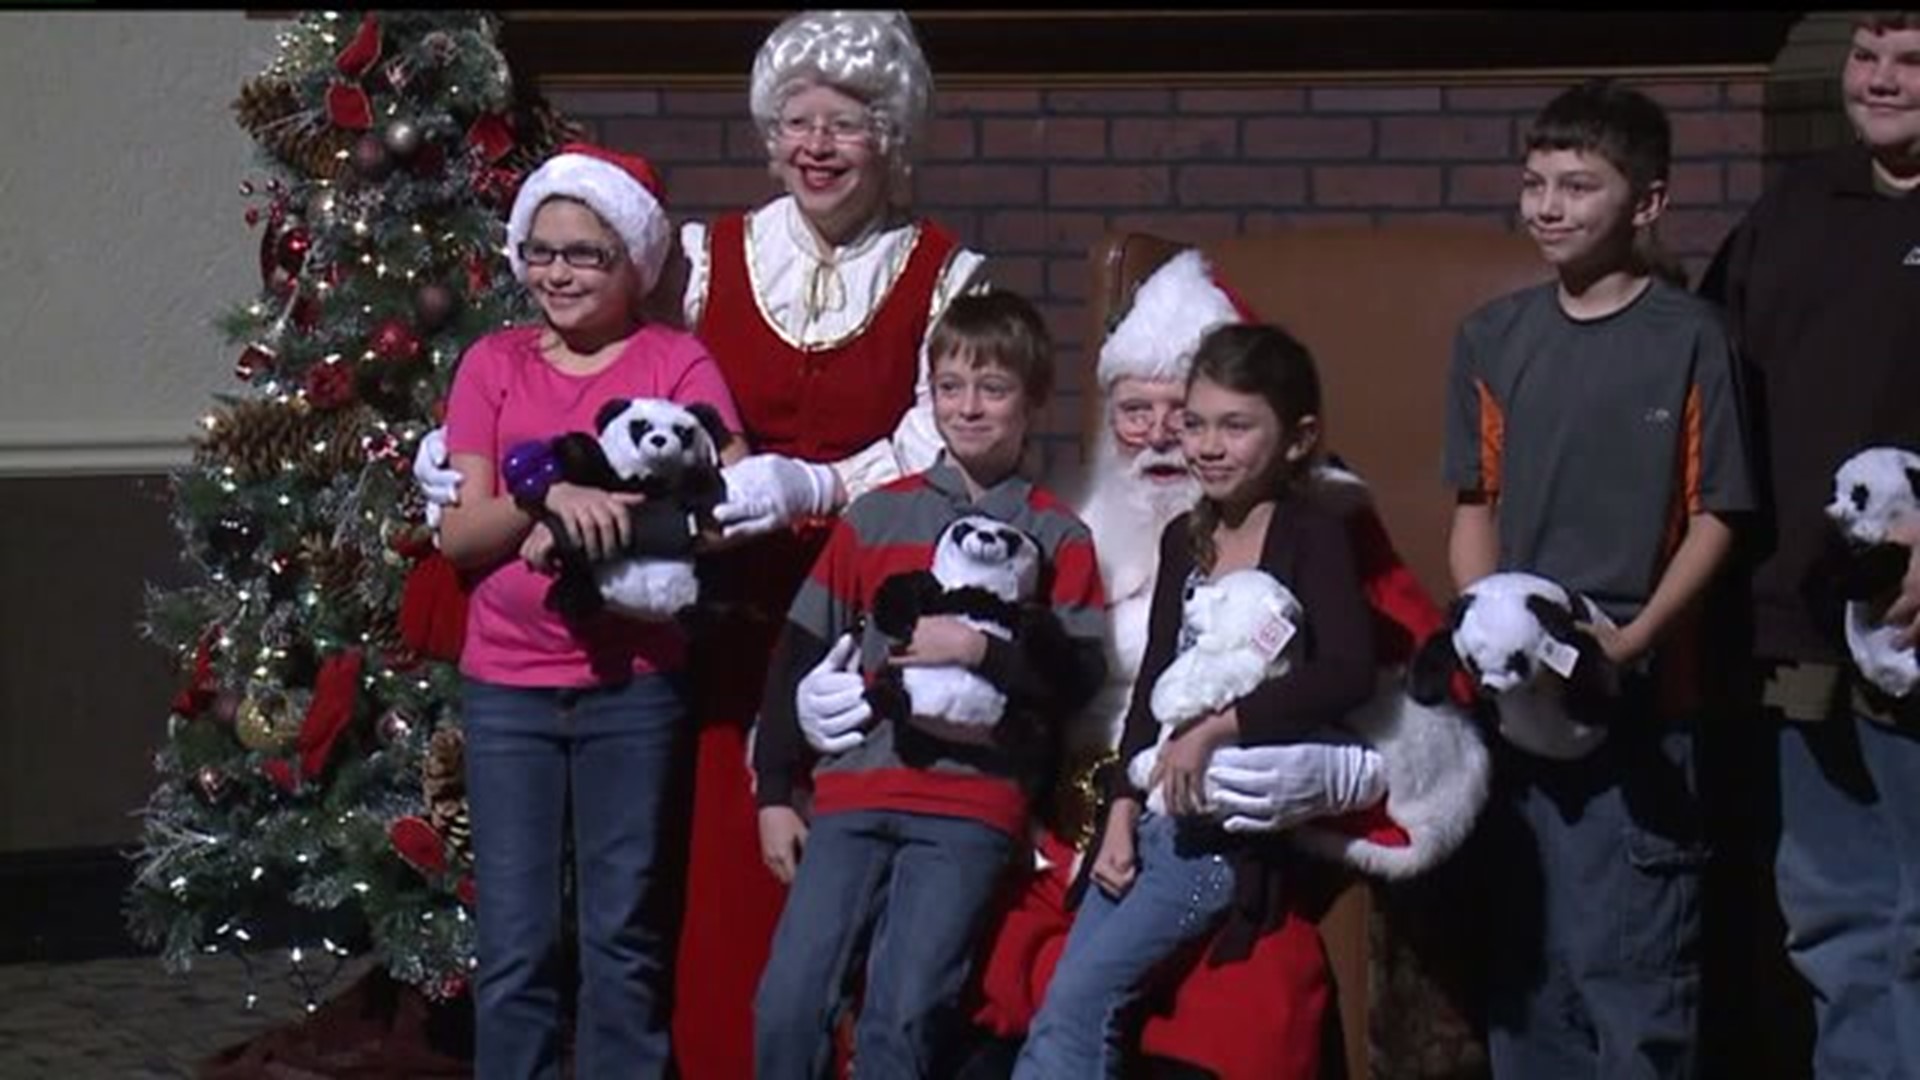 Annual Christmas party to benefit kids with cancer